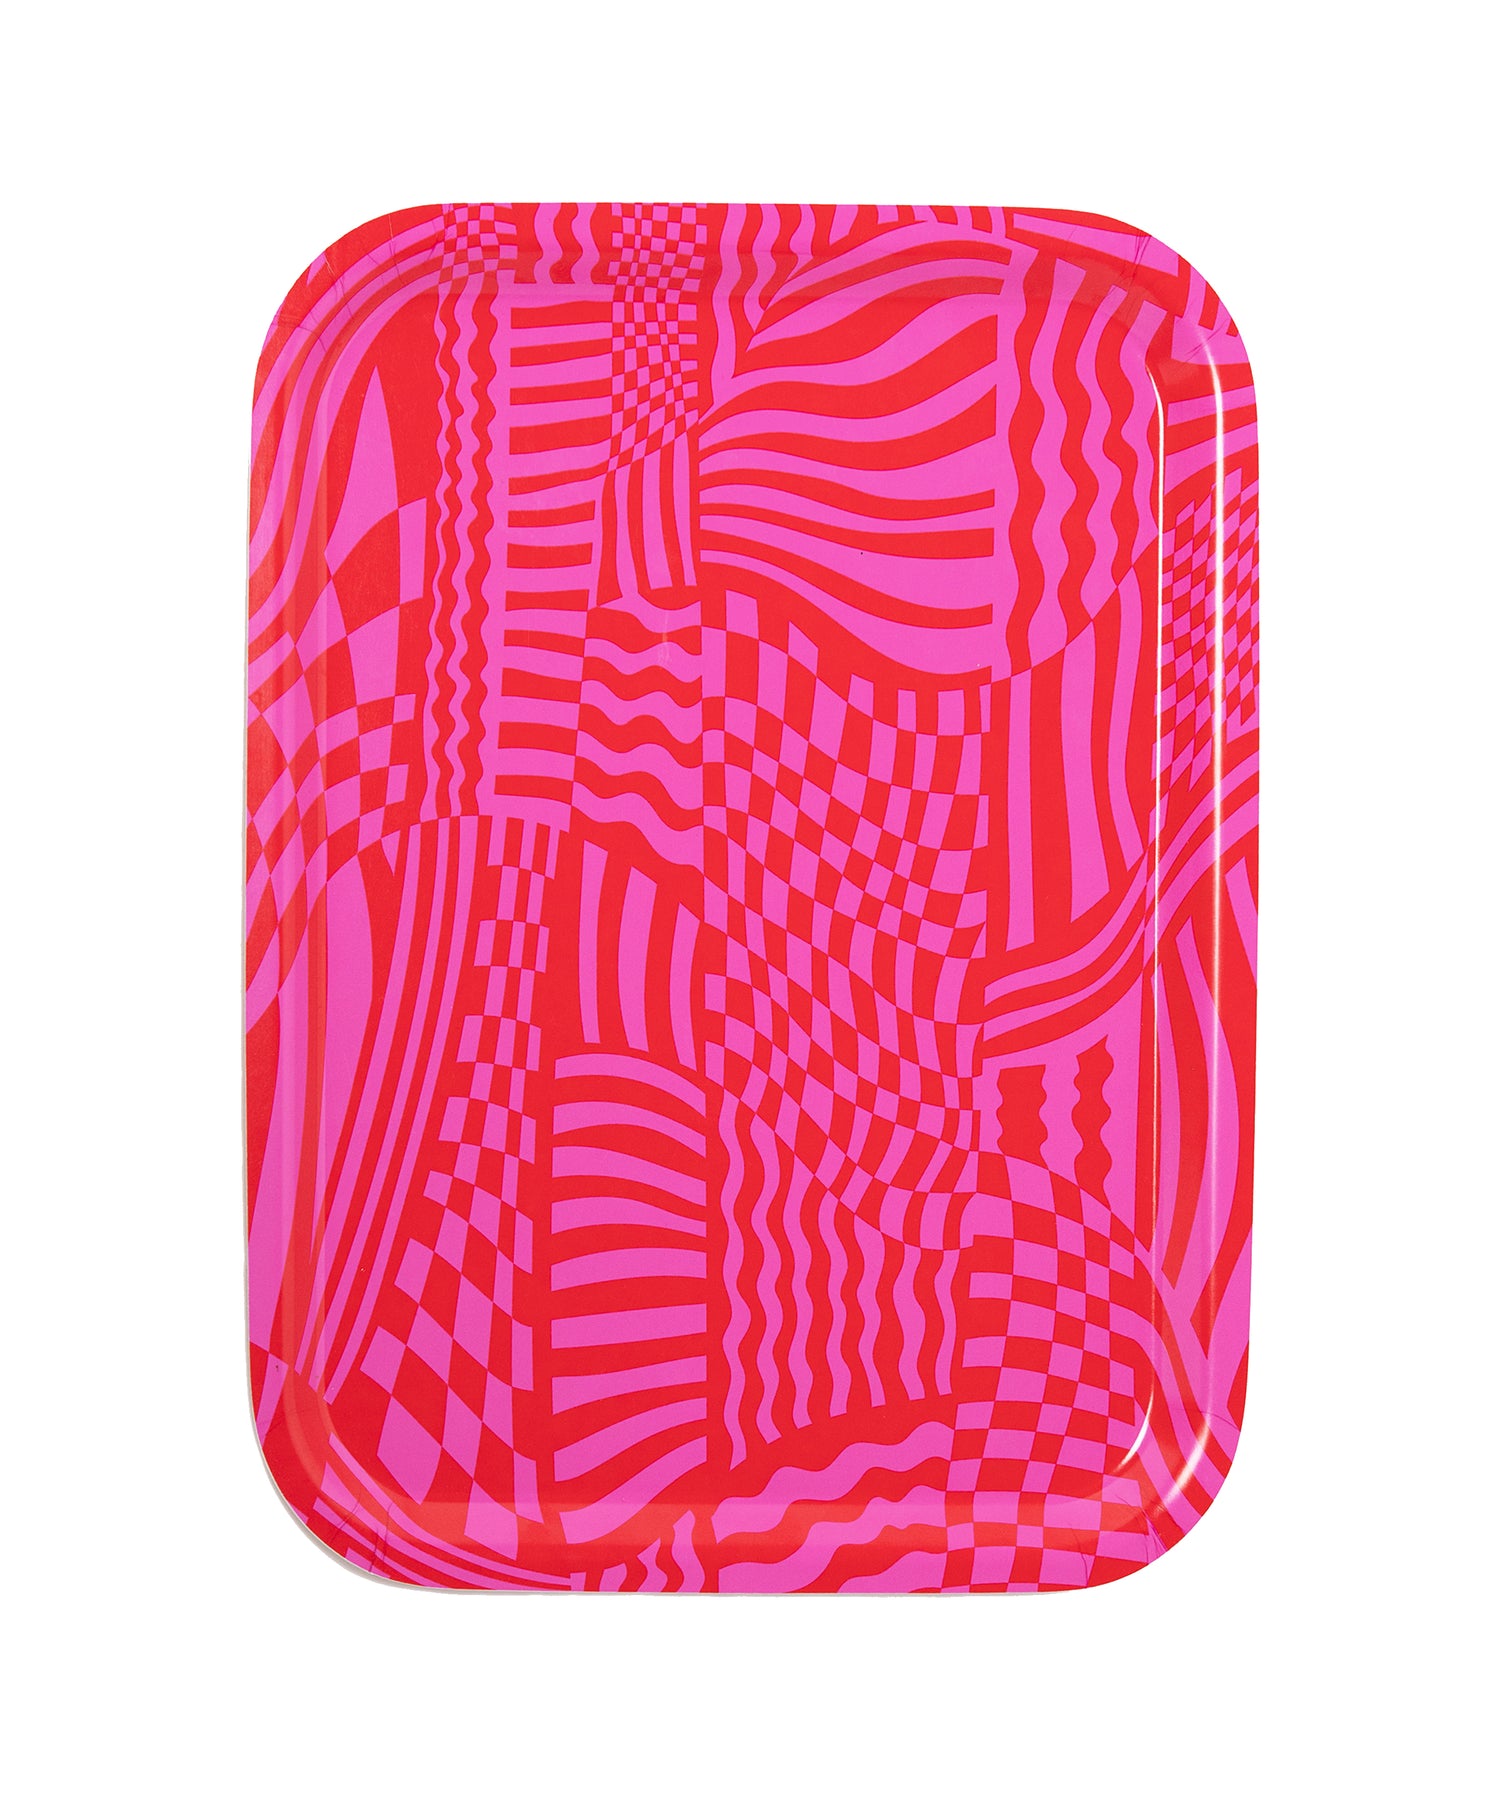 Image of the Wiggles and Waves Tray with a pink and red abstract design consisting of checkerboards, stripes and waves. Tray is approximately 14” x 11” and is made from ethically sourced birch.